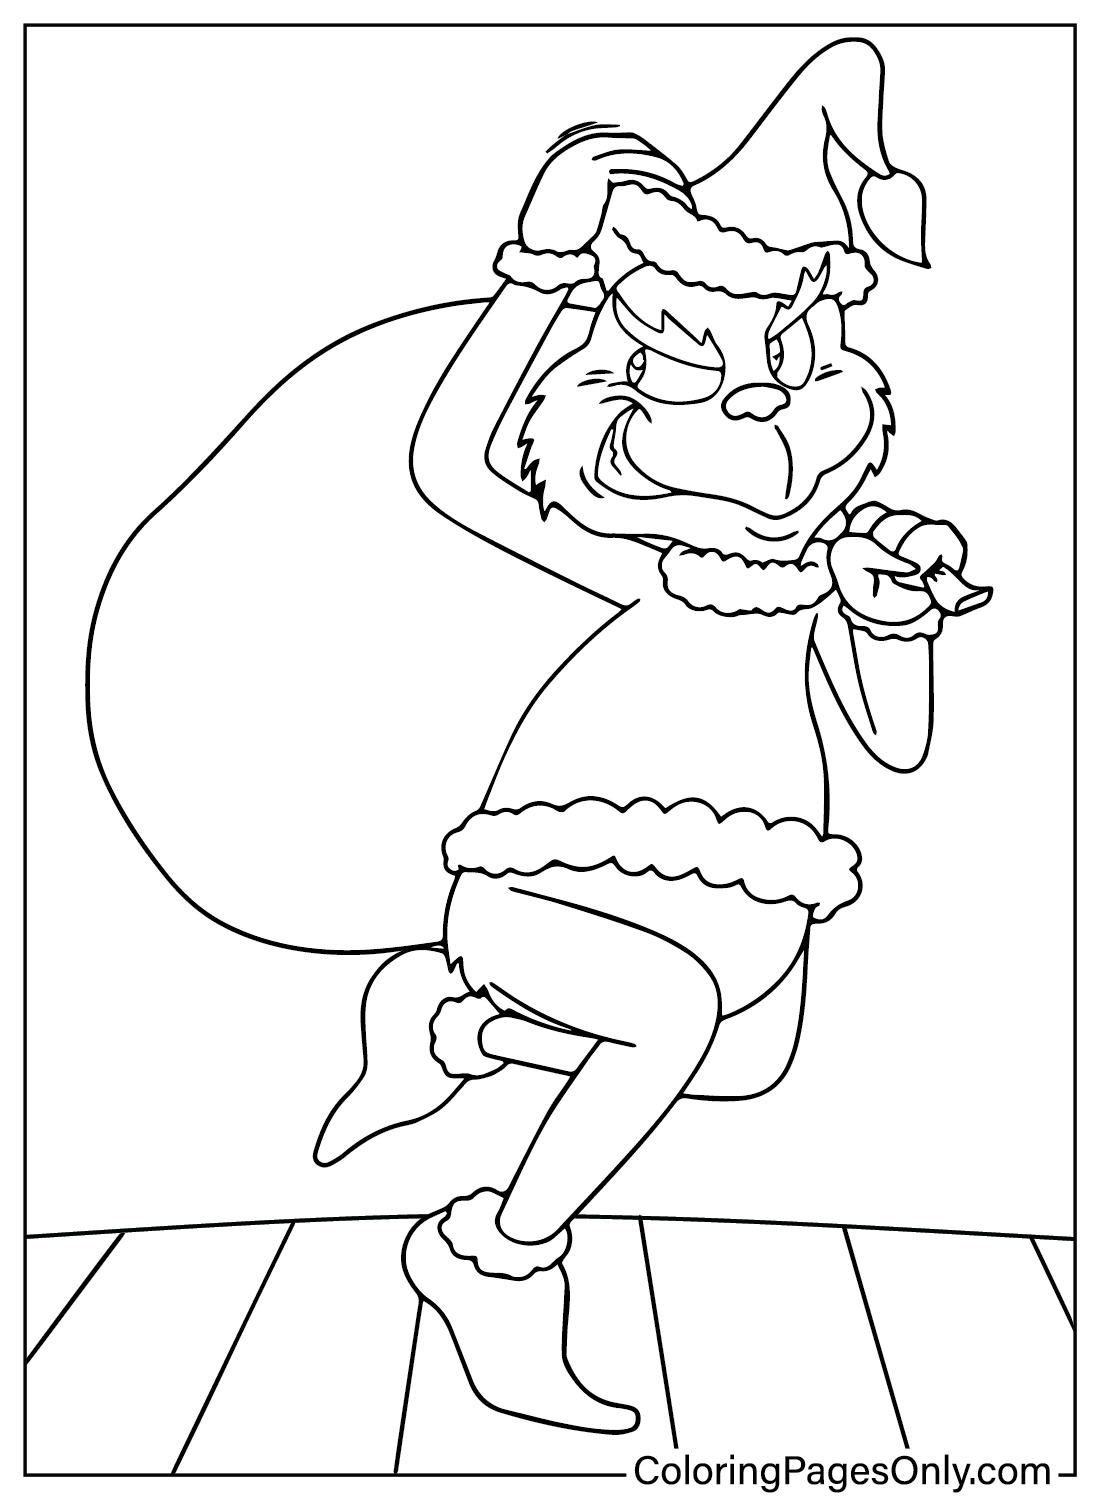 Coloring pages only on x ð grinch coloring pagesð httpstcorpicrbgev grinch christmas xmas merychristmas holidays winter gifts coloringpagesonly coloringpages coloringbook art fanart sketch drawing draw coloring usa trend